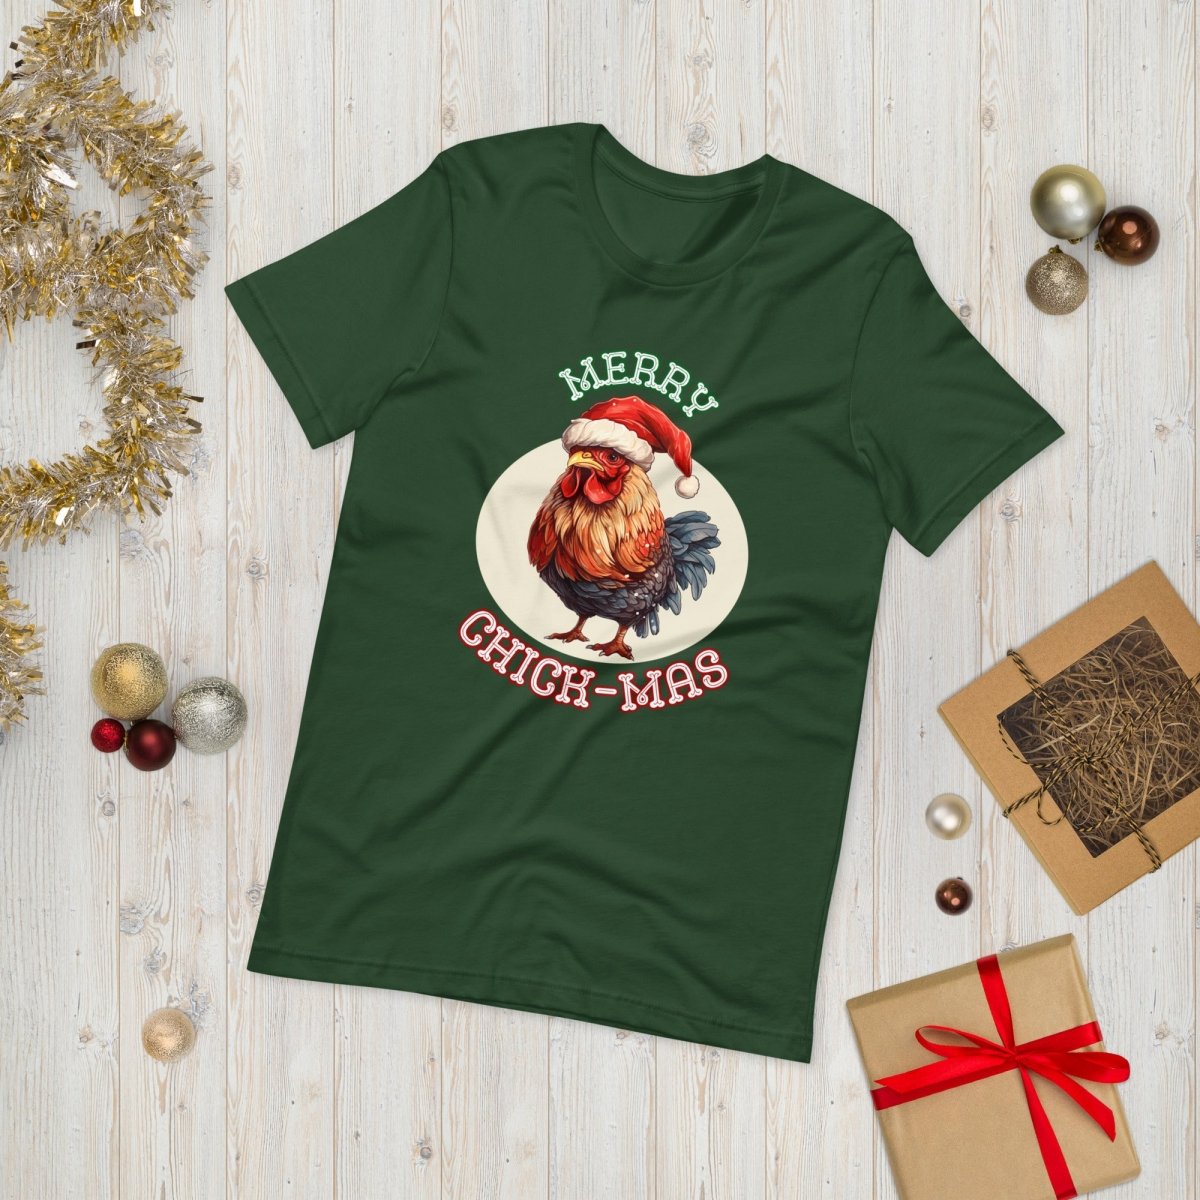 Christmas Chicken T-Shirt - High Quality Festive Unisex T-Shirt, Gift for Him, Gift for Chicken Lovers, Funny Farm Animal Xmas Shirt - Everything Pixel